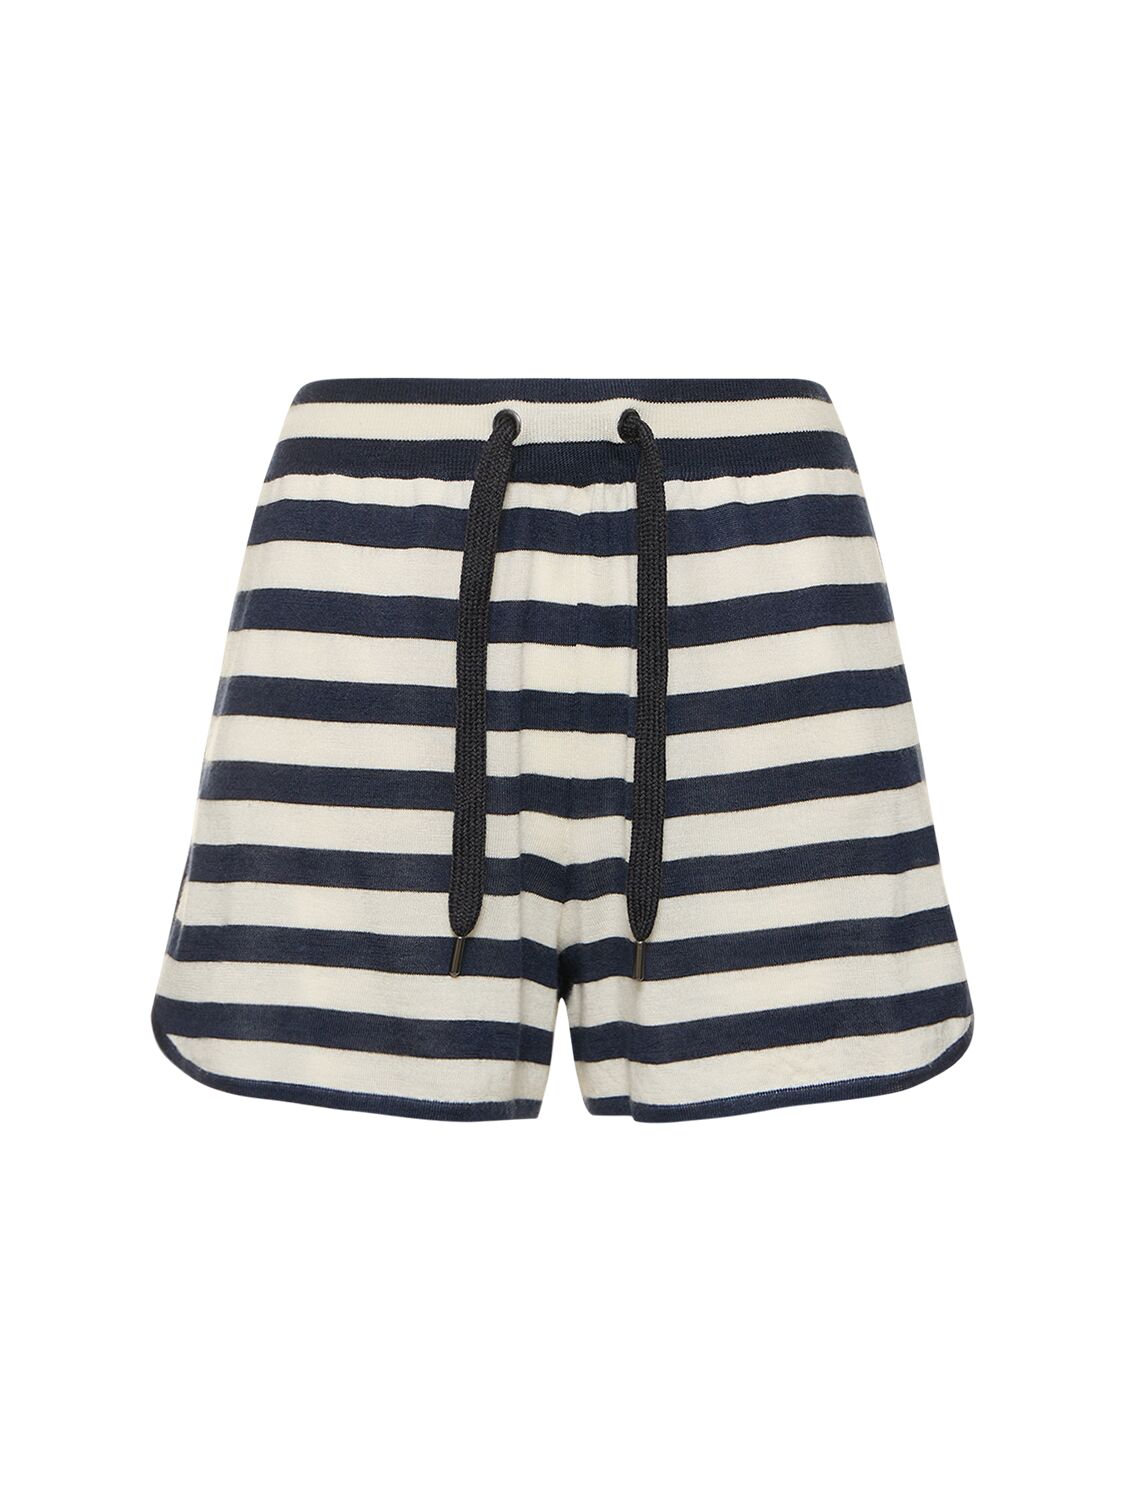 Image of Striped Cashmere & Silk Shorts